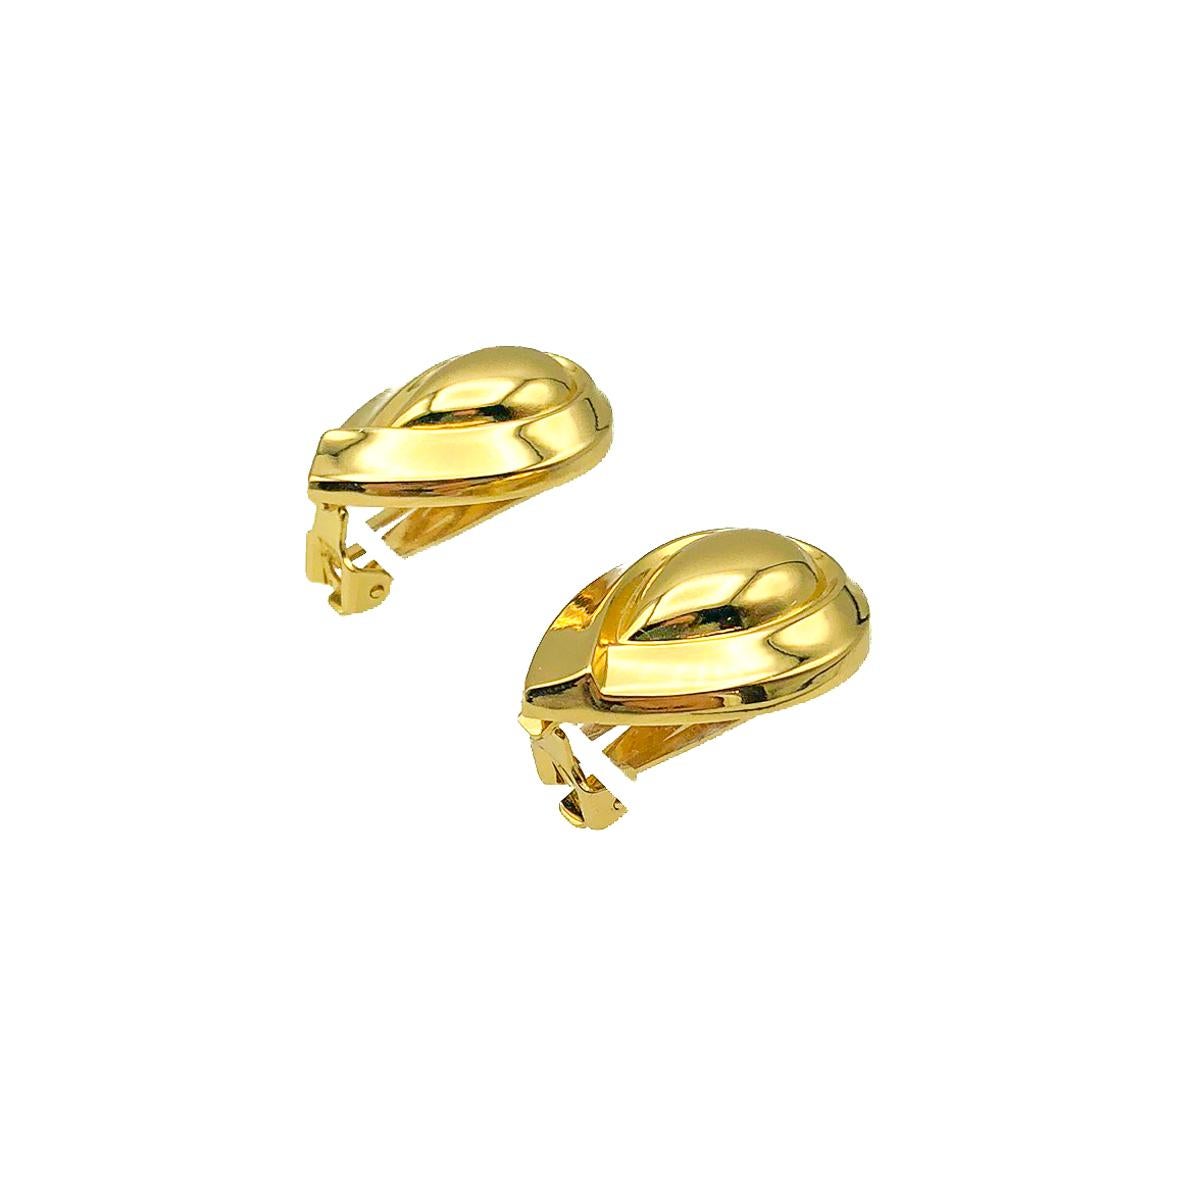 Vintage Dior Teardrop Earrings. Crafted in gold plated metal. In very good vintage condition. Signed. Approx. 3cms. The perfect go to earring that will become a firm style staple, morning till night.

Established in 2016, this is a British brand